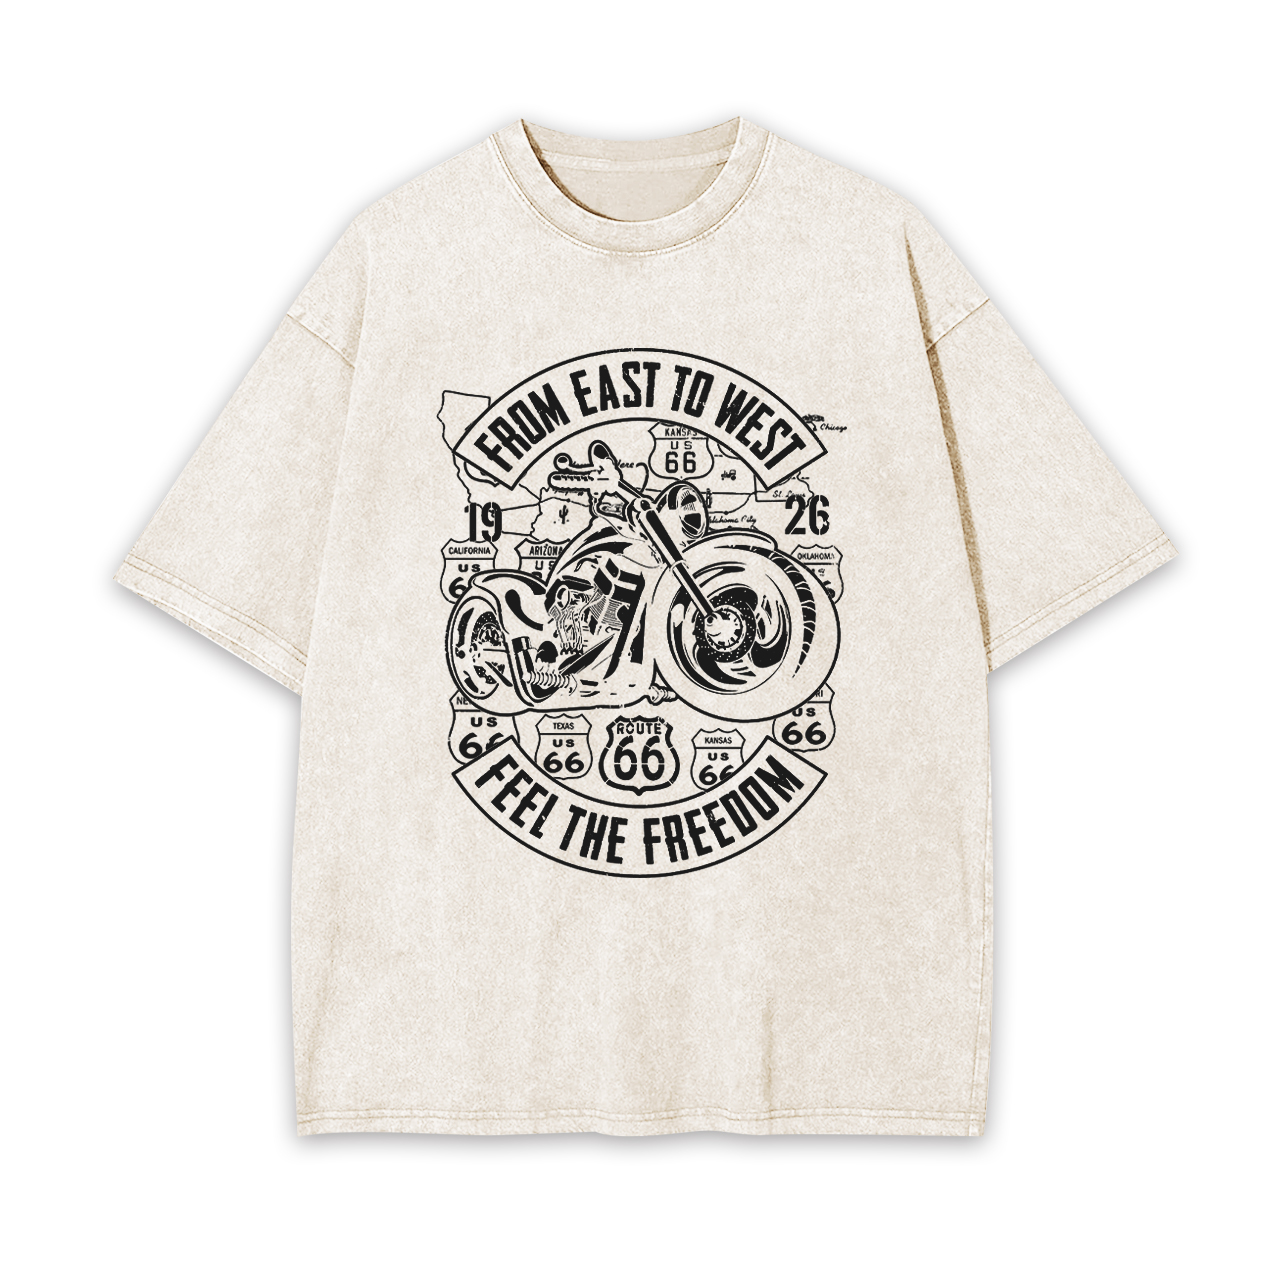 Route 66 From East To West Biker Garment-dye Tees